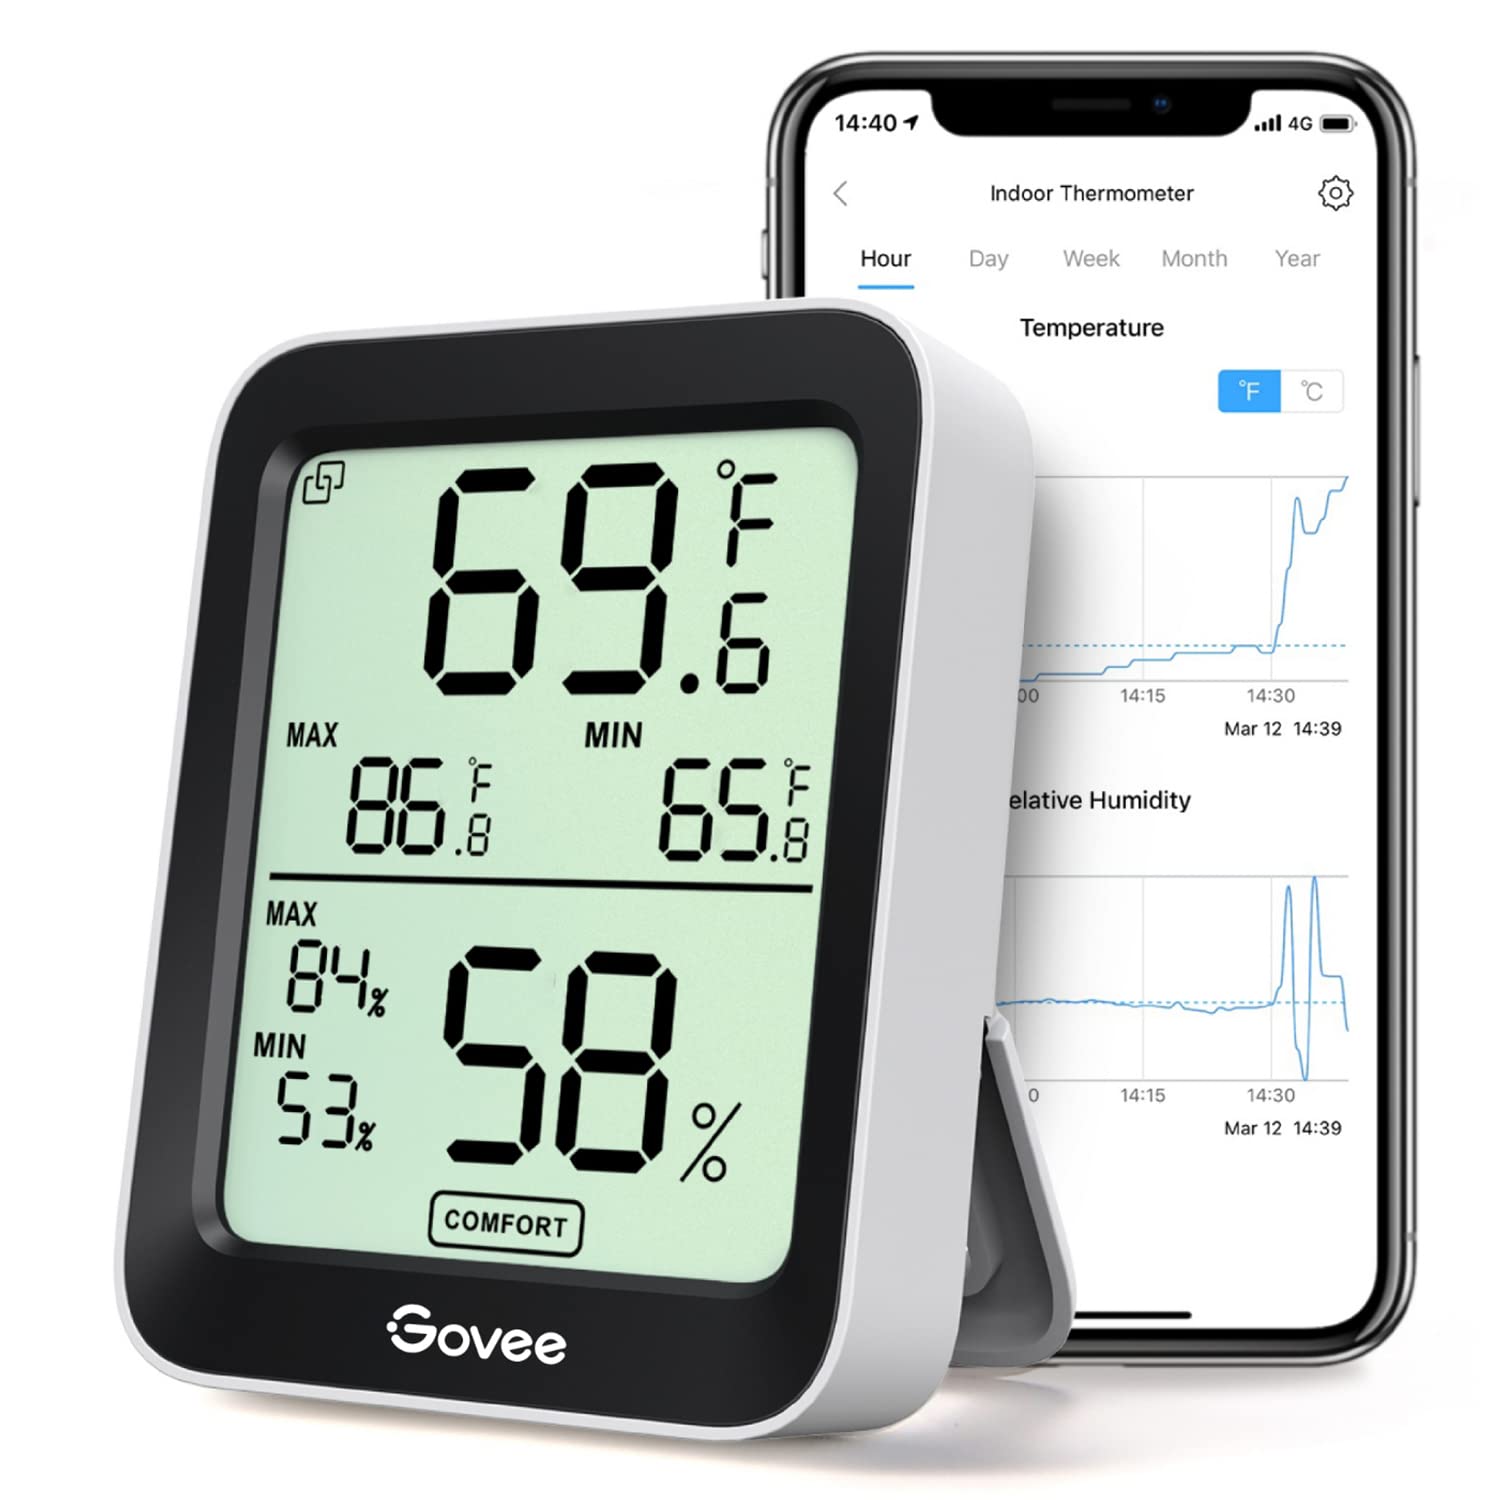 Govee Hygrometer Thermometer H5075, Bluetooth Indoor [...]